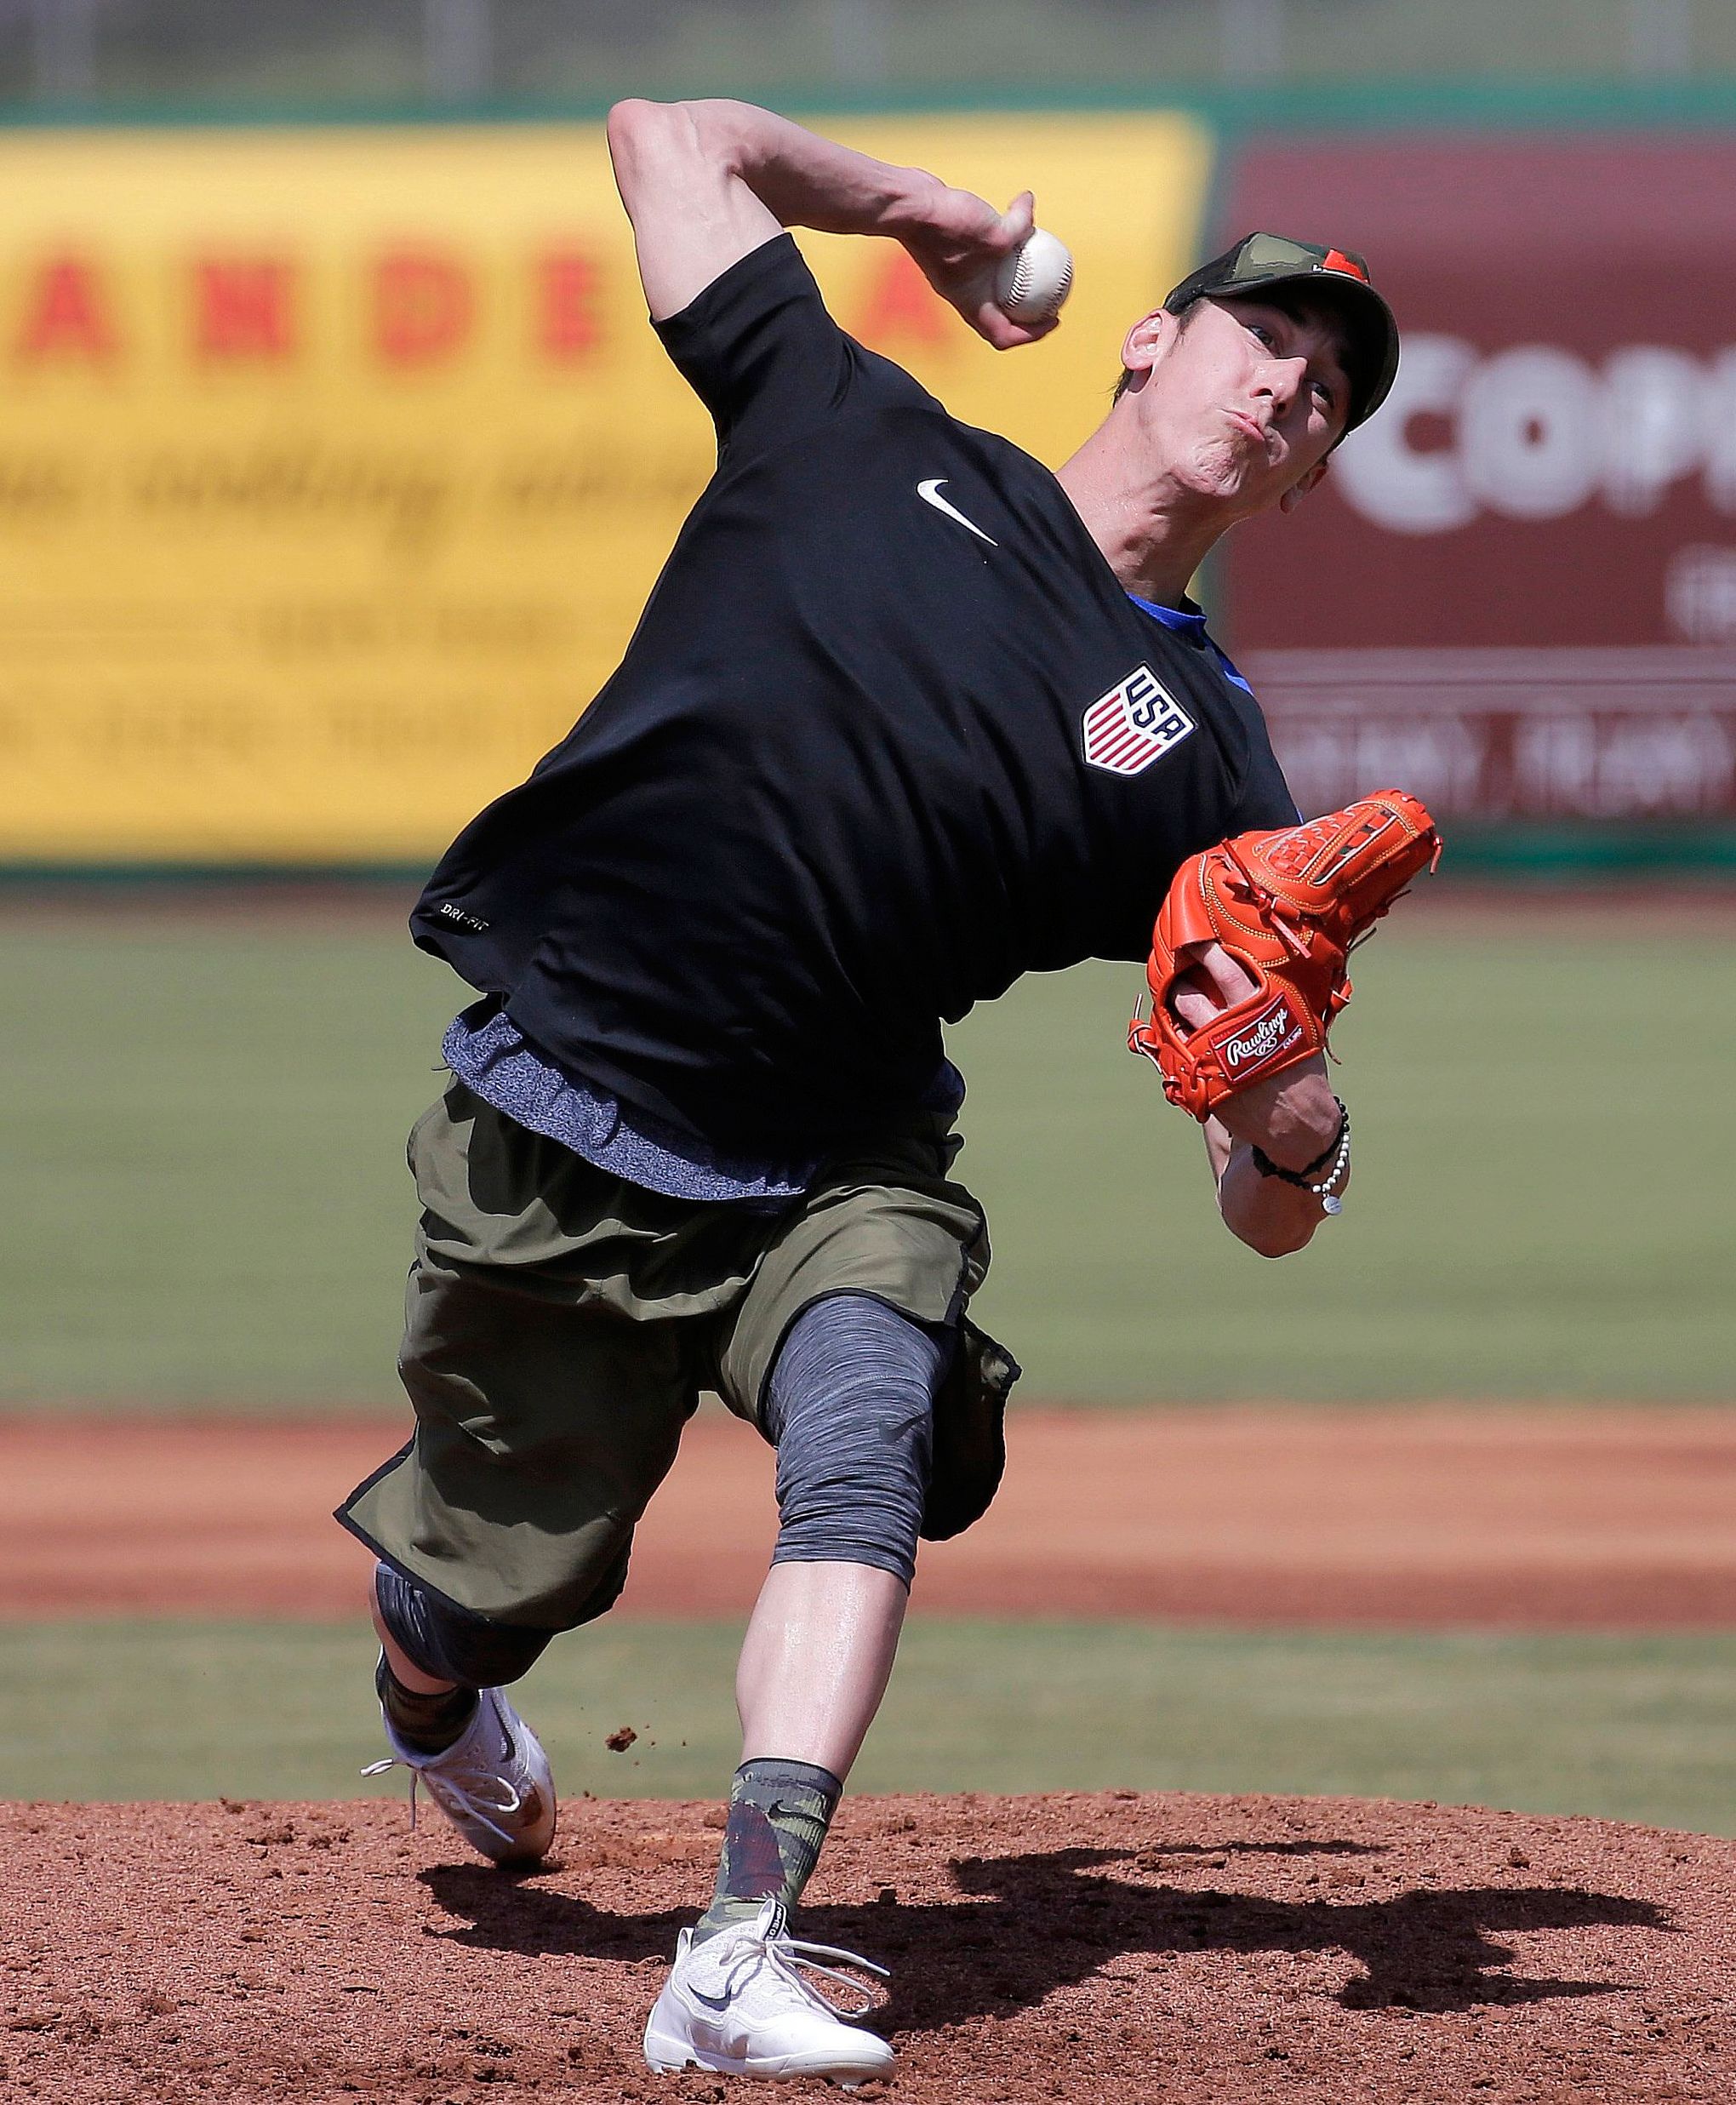 Tim Lincecum embraces a second chance with new Angels team